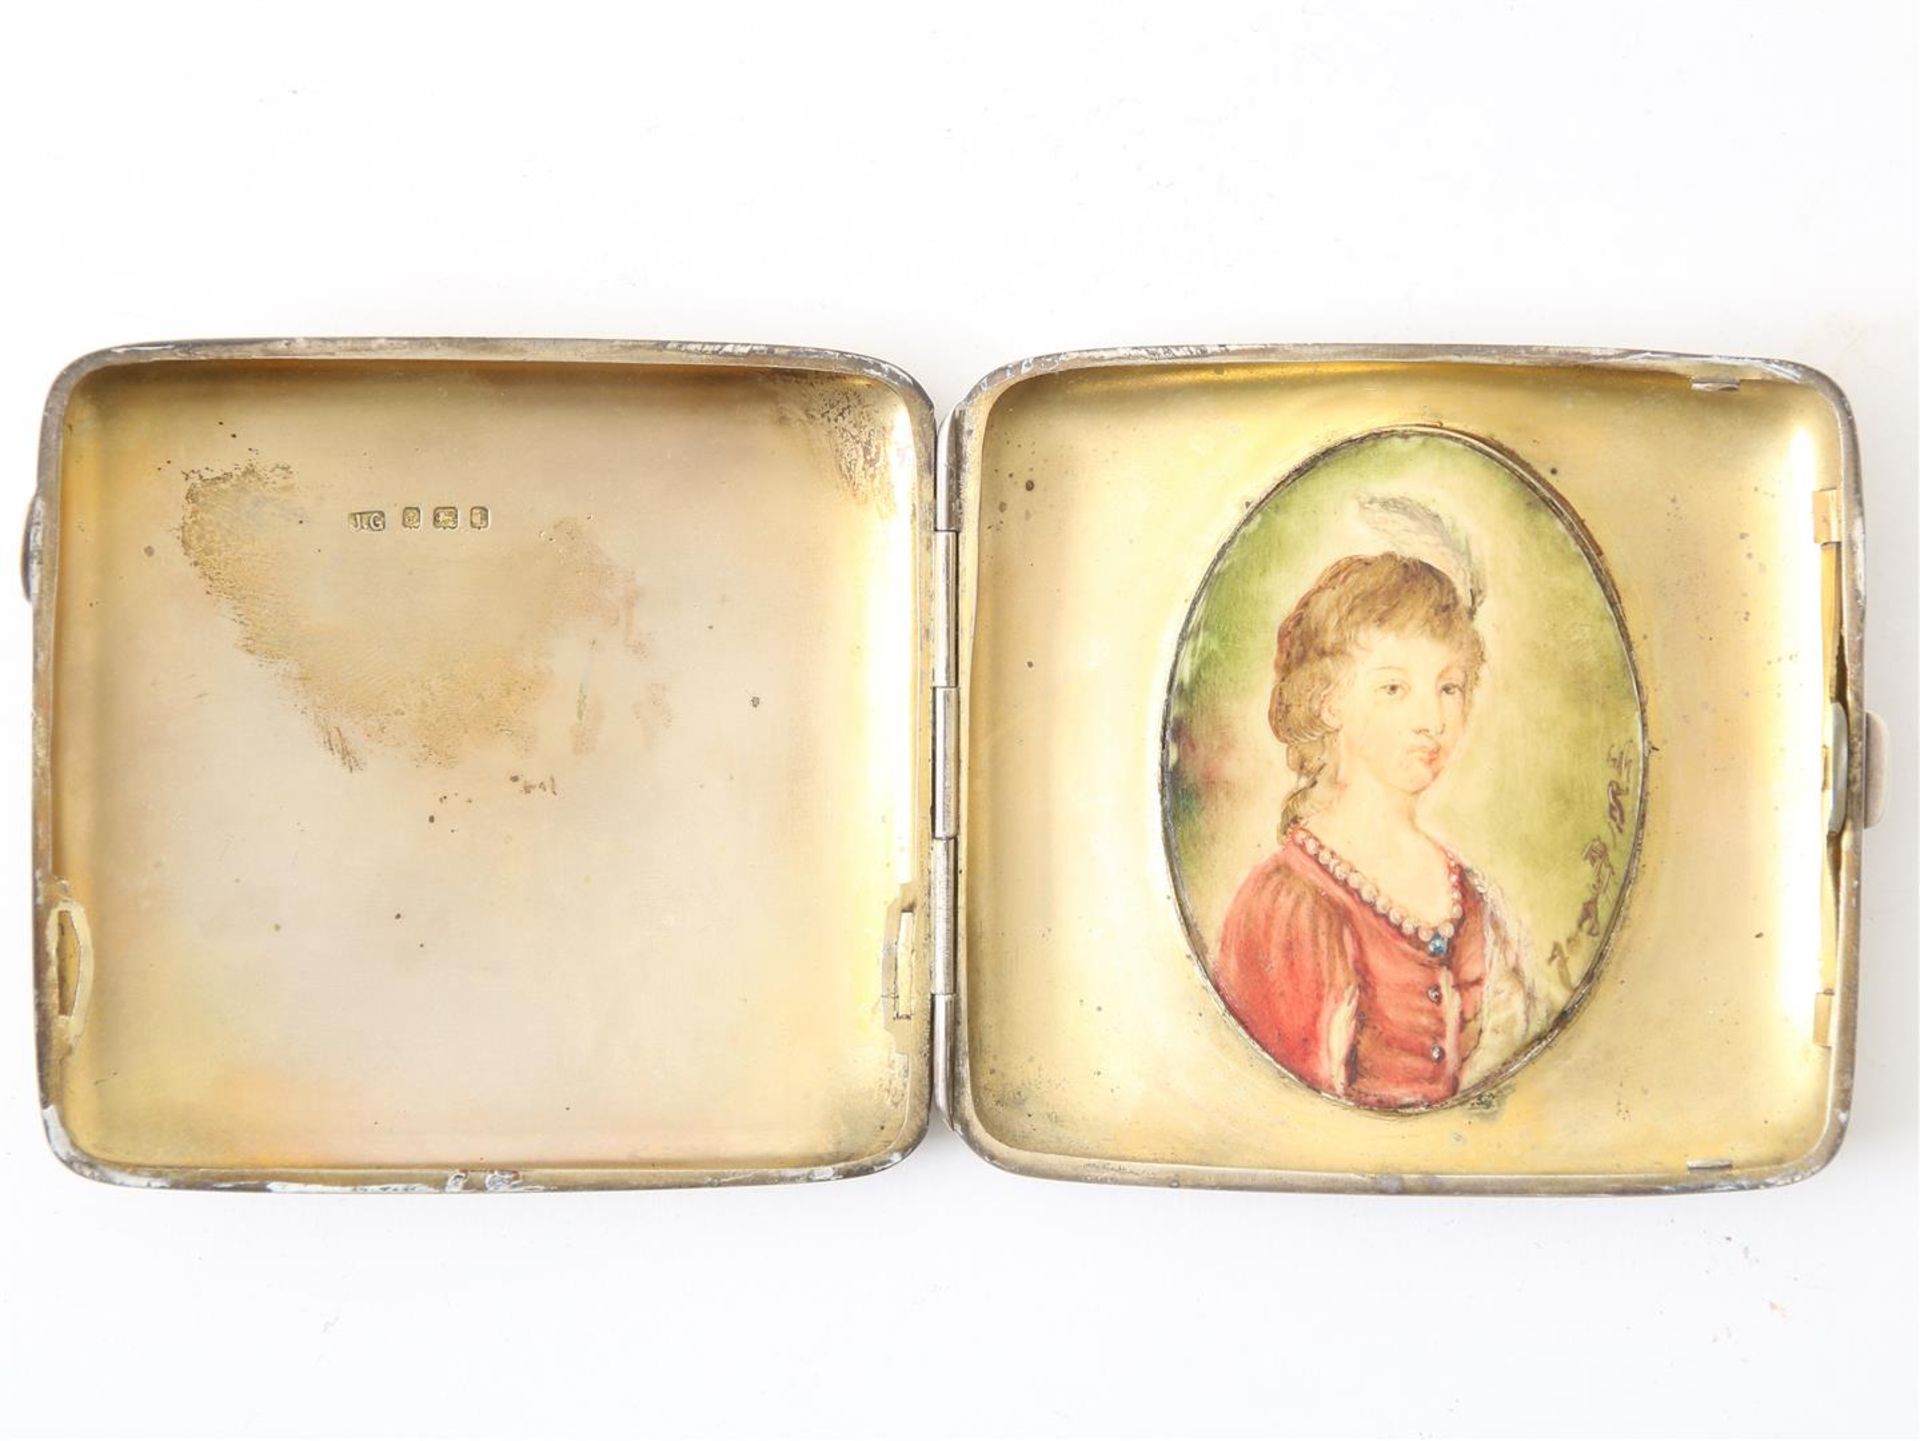 Two silver tobacco boxes, one with a miniature portrait, grade 925/000, England - Image 2 of 5